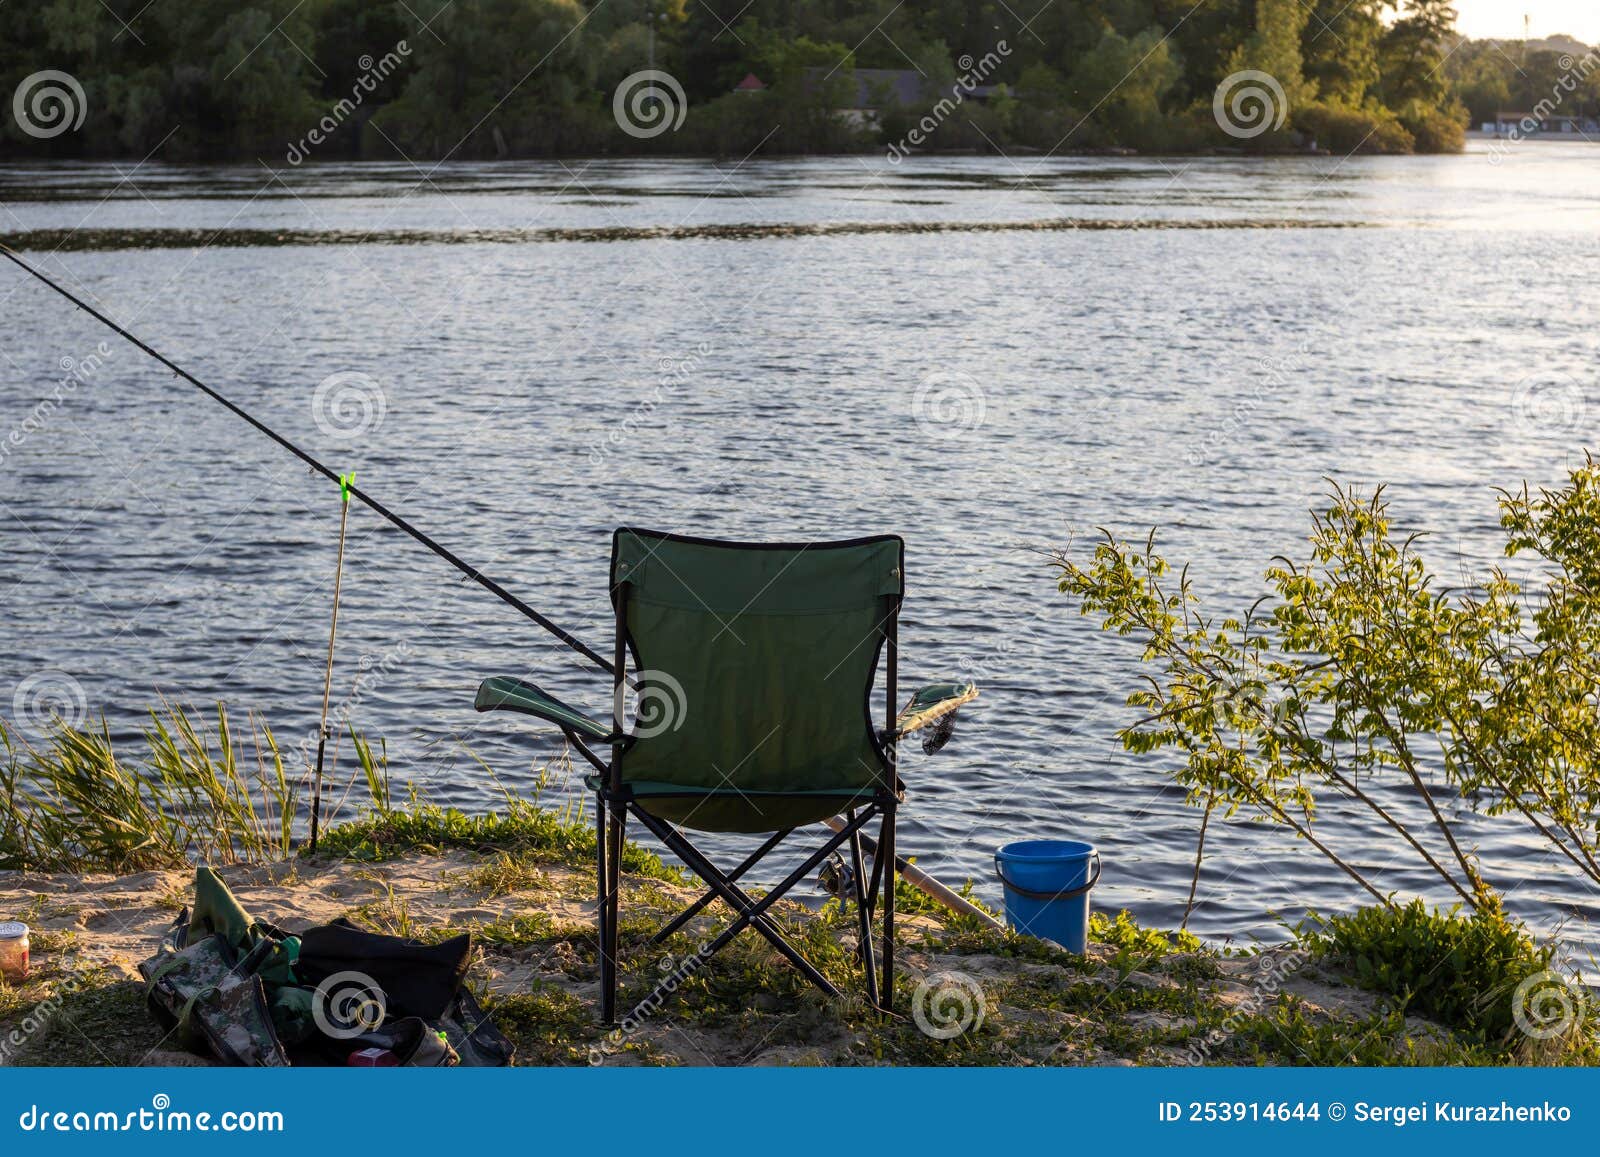 Landscape with a Fisherman S Chair and Fishing Rods on the Lake